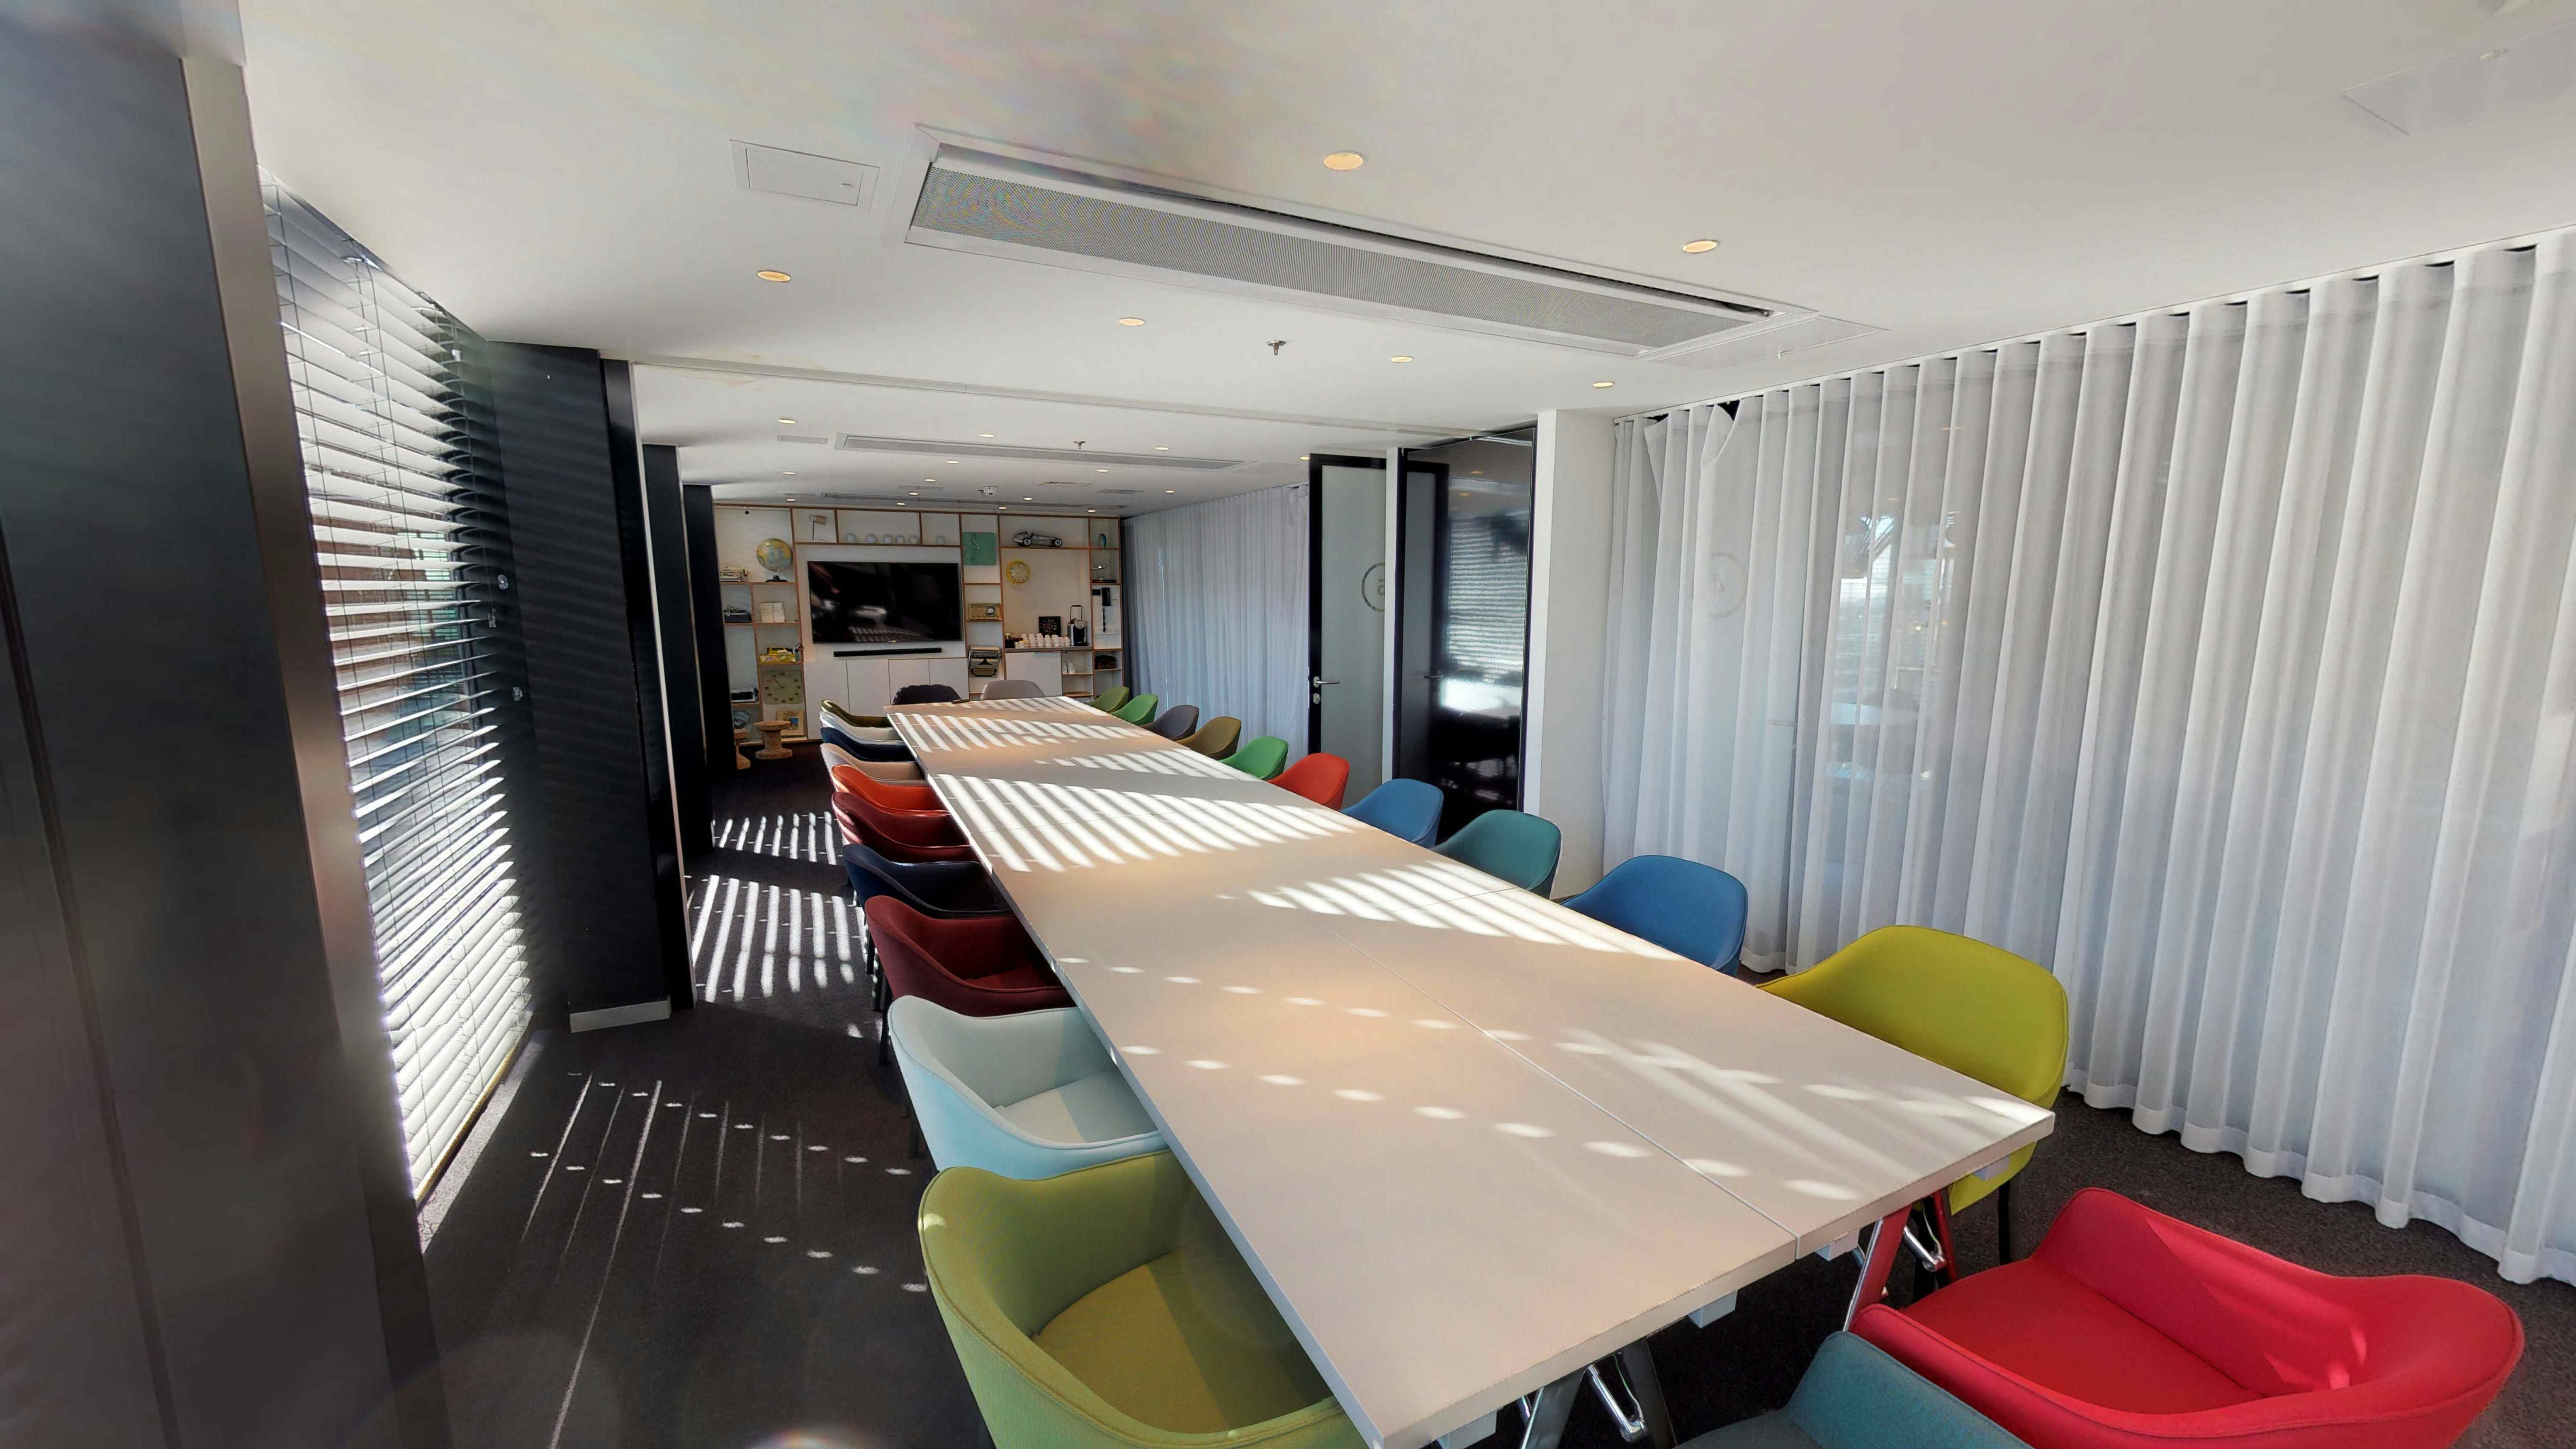 Meeting Room 9, societyM at citizenM